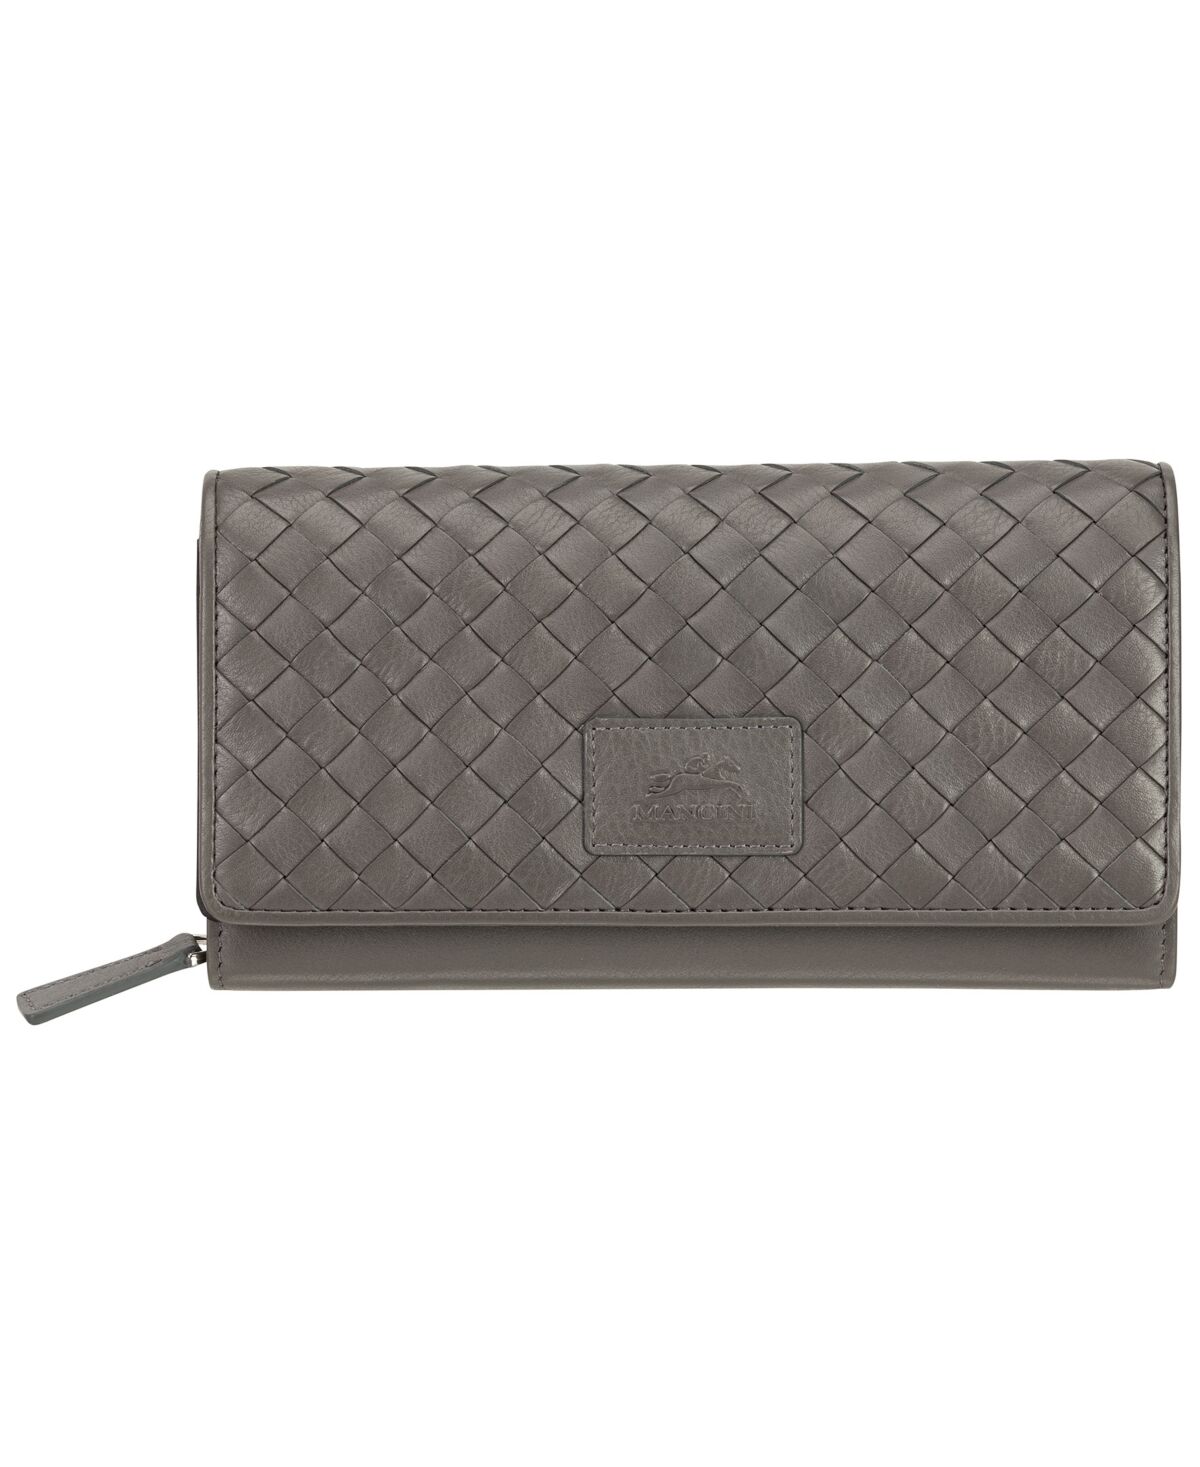 Mancini Women's Basket Weave Collection Rfid Secure Clutch Wallet - Gray